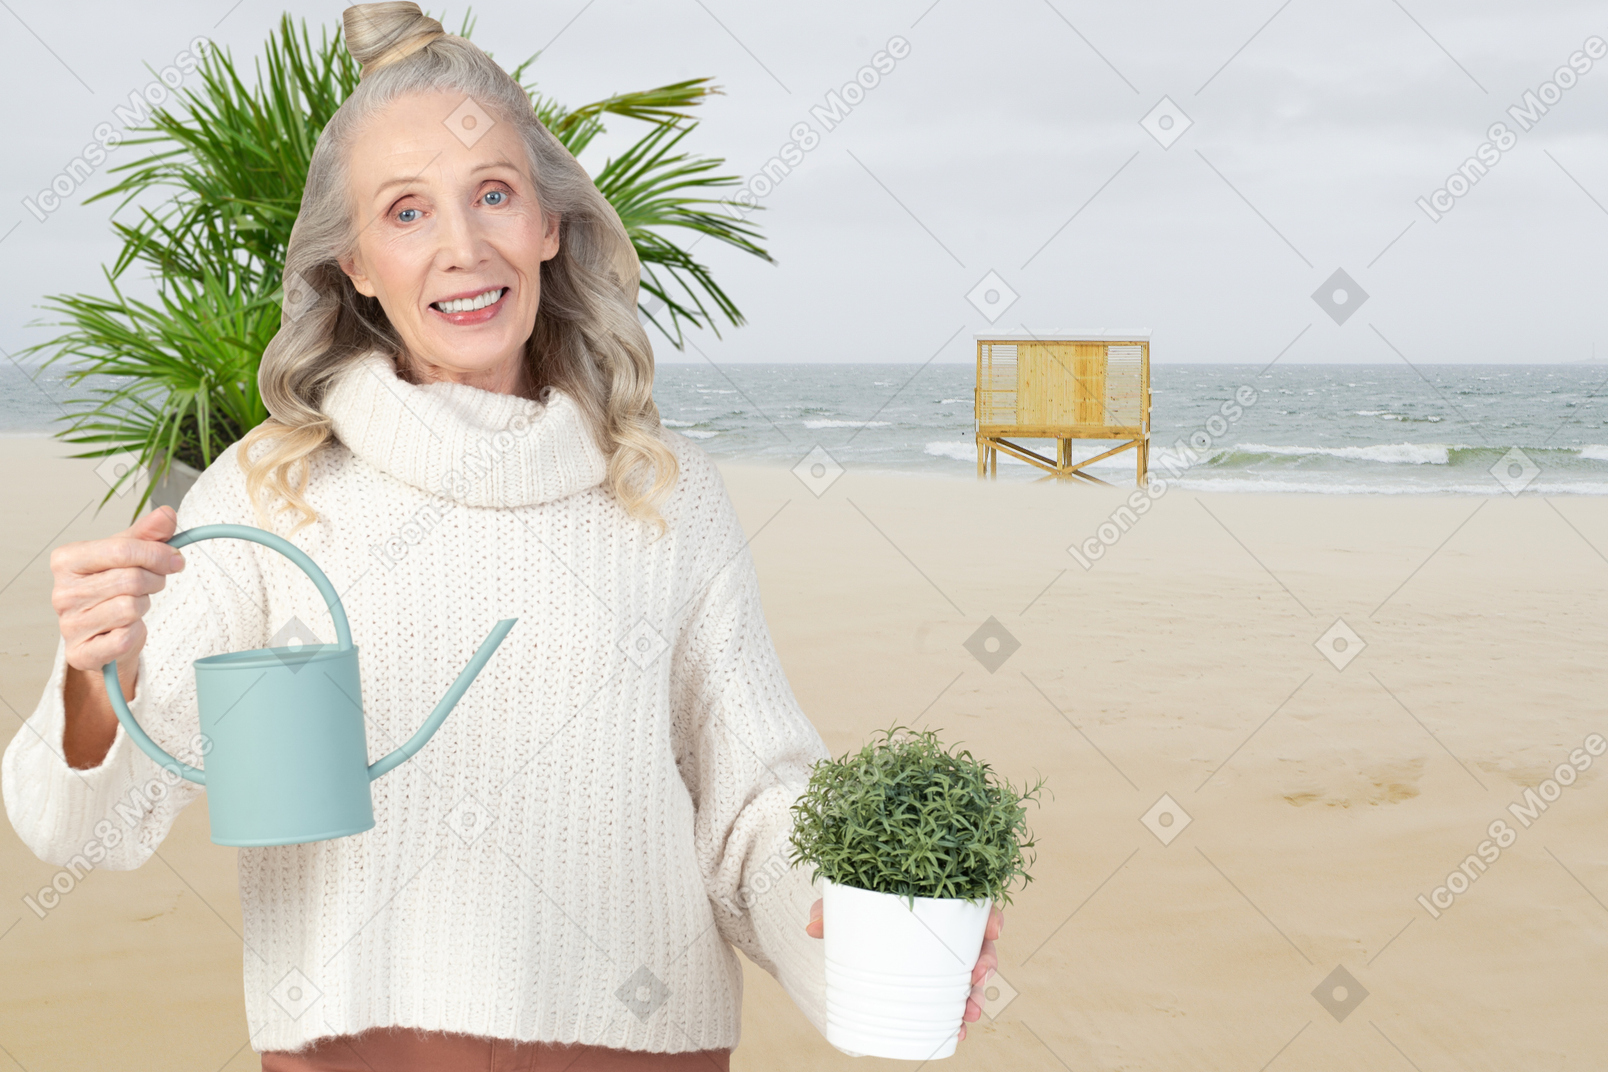 Senior woman holding watering can and potted plant on beach background